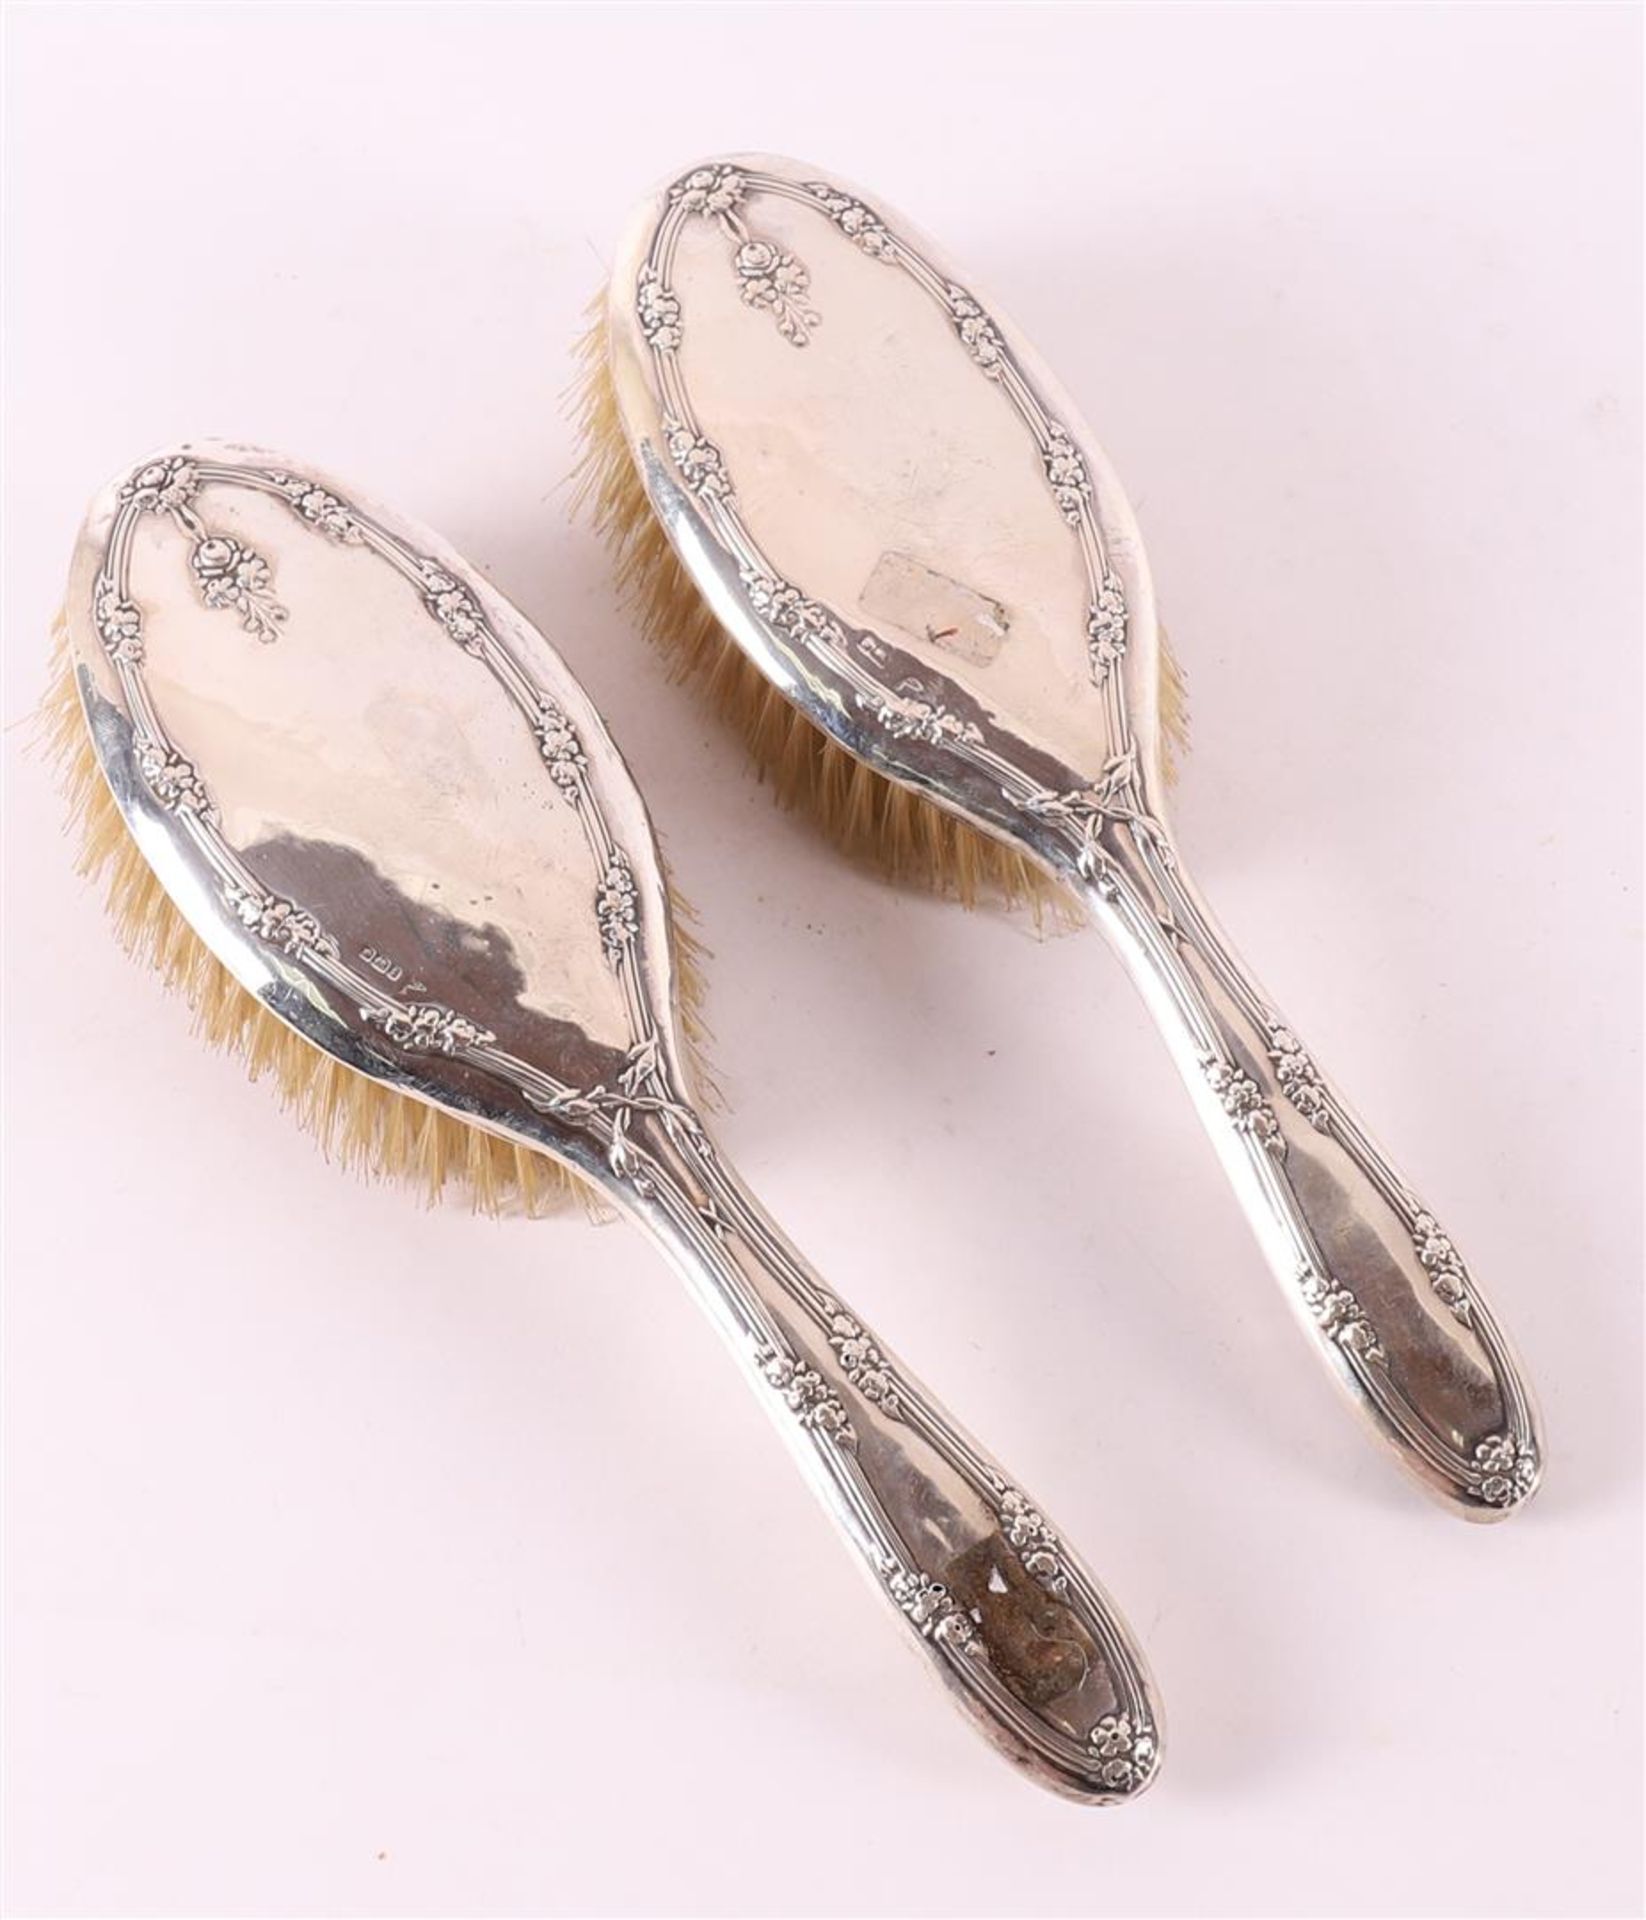 A set of silver-mounted brushes, circa 1900.